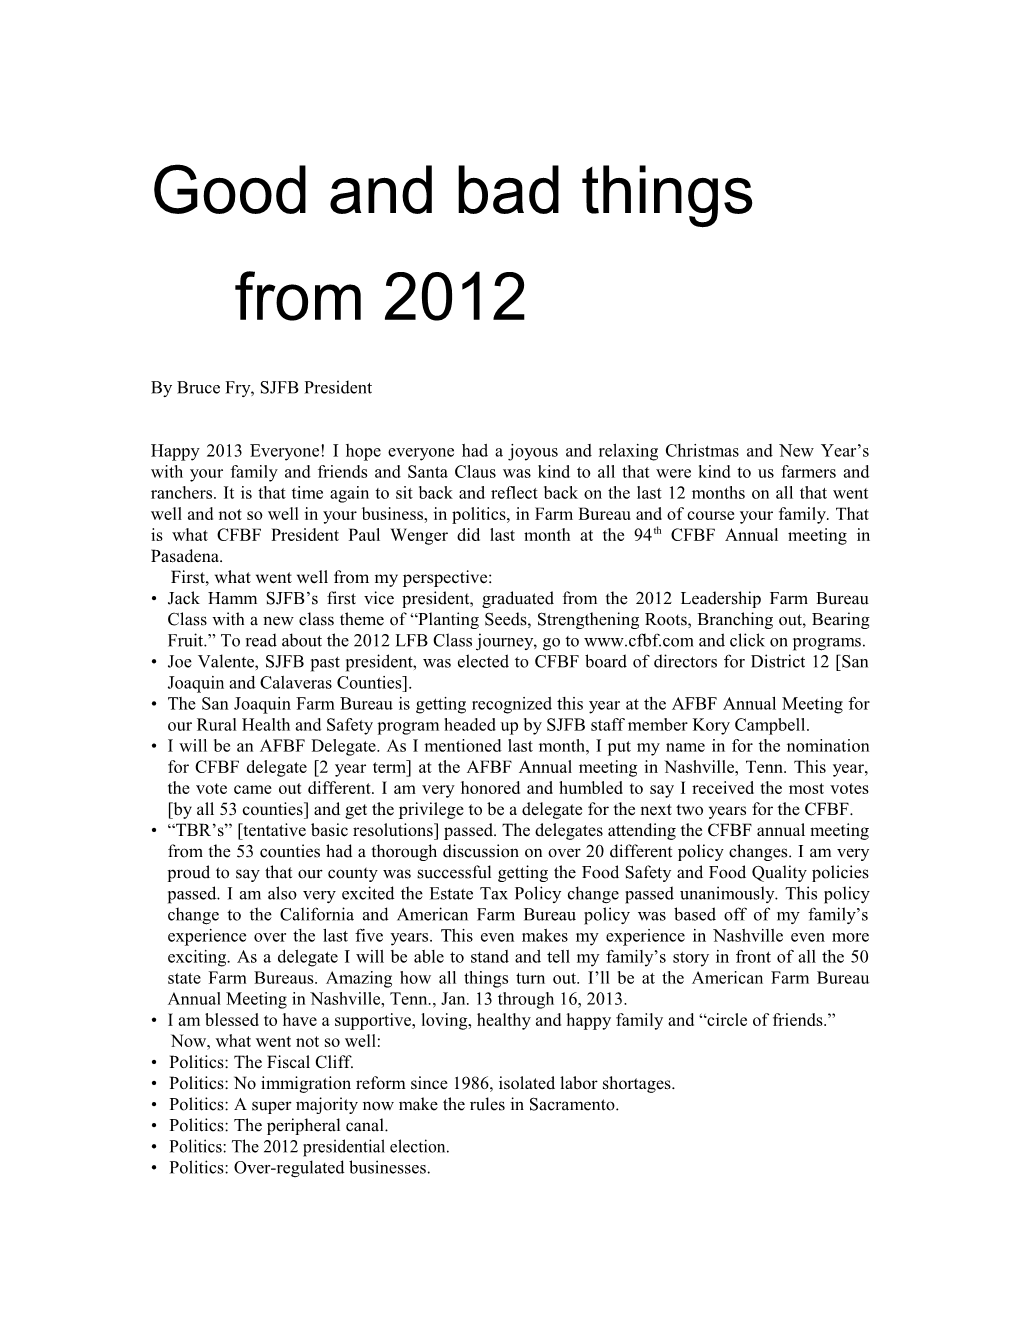 Good and Bad Things from 2012